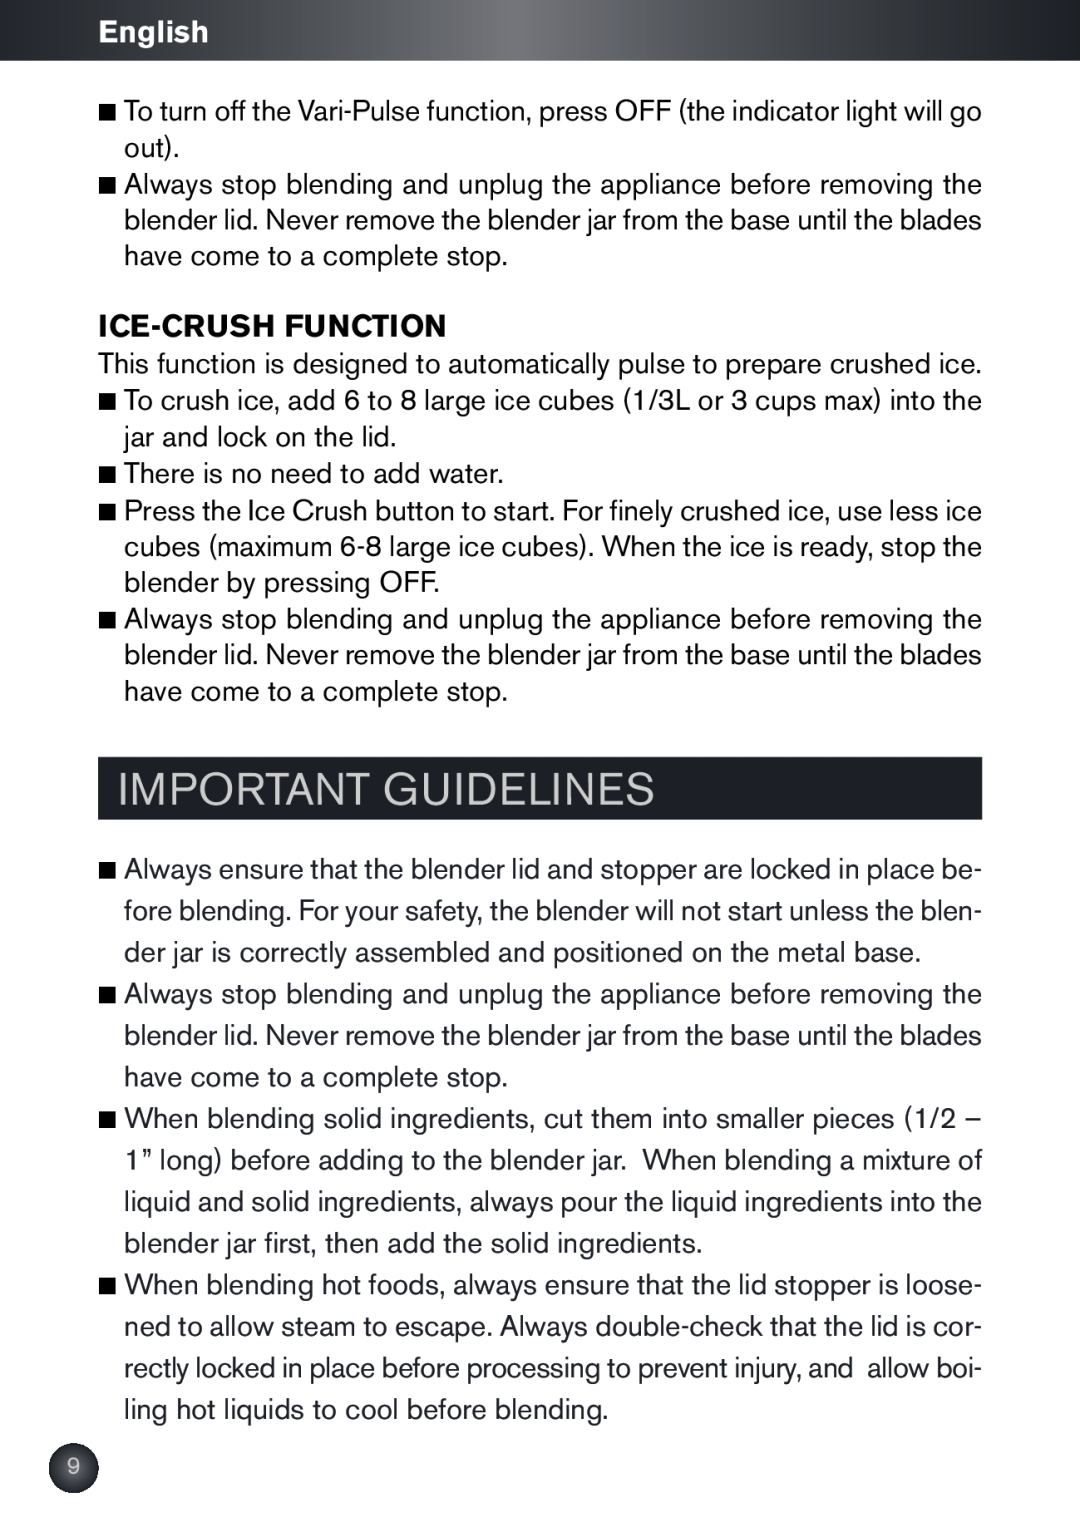 Krups KB790 manual Important Guidelines, English, Ice-Crush Function 